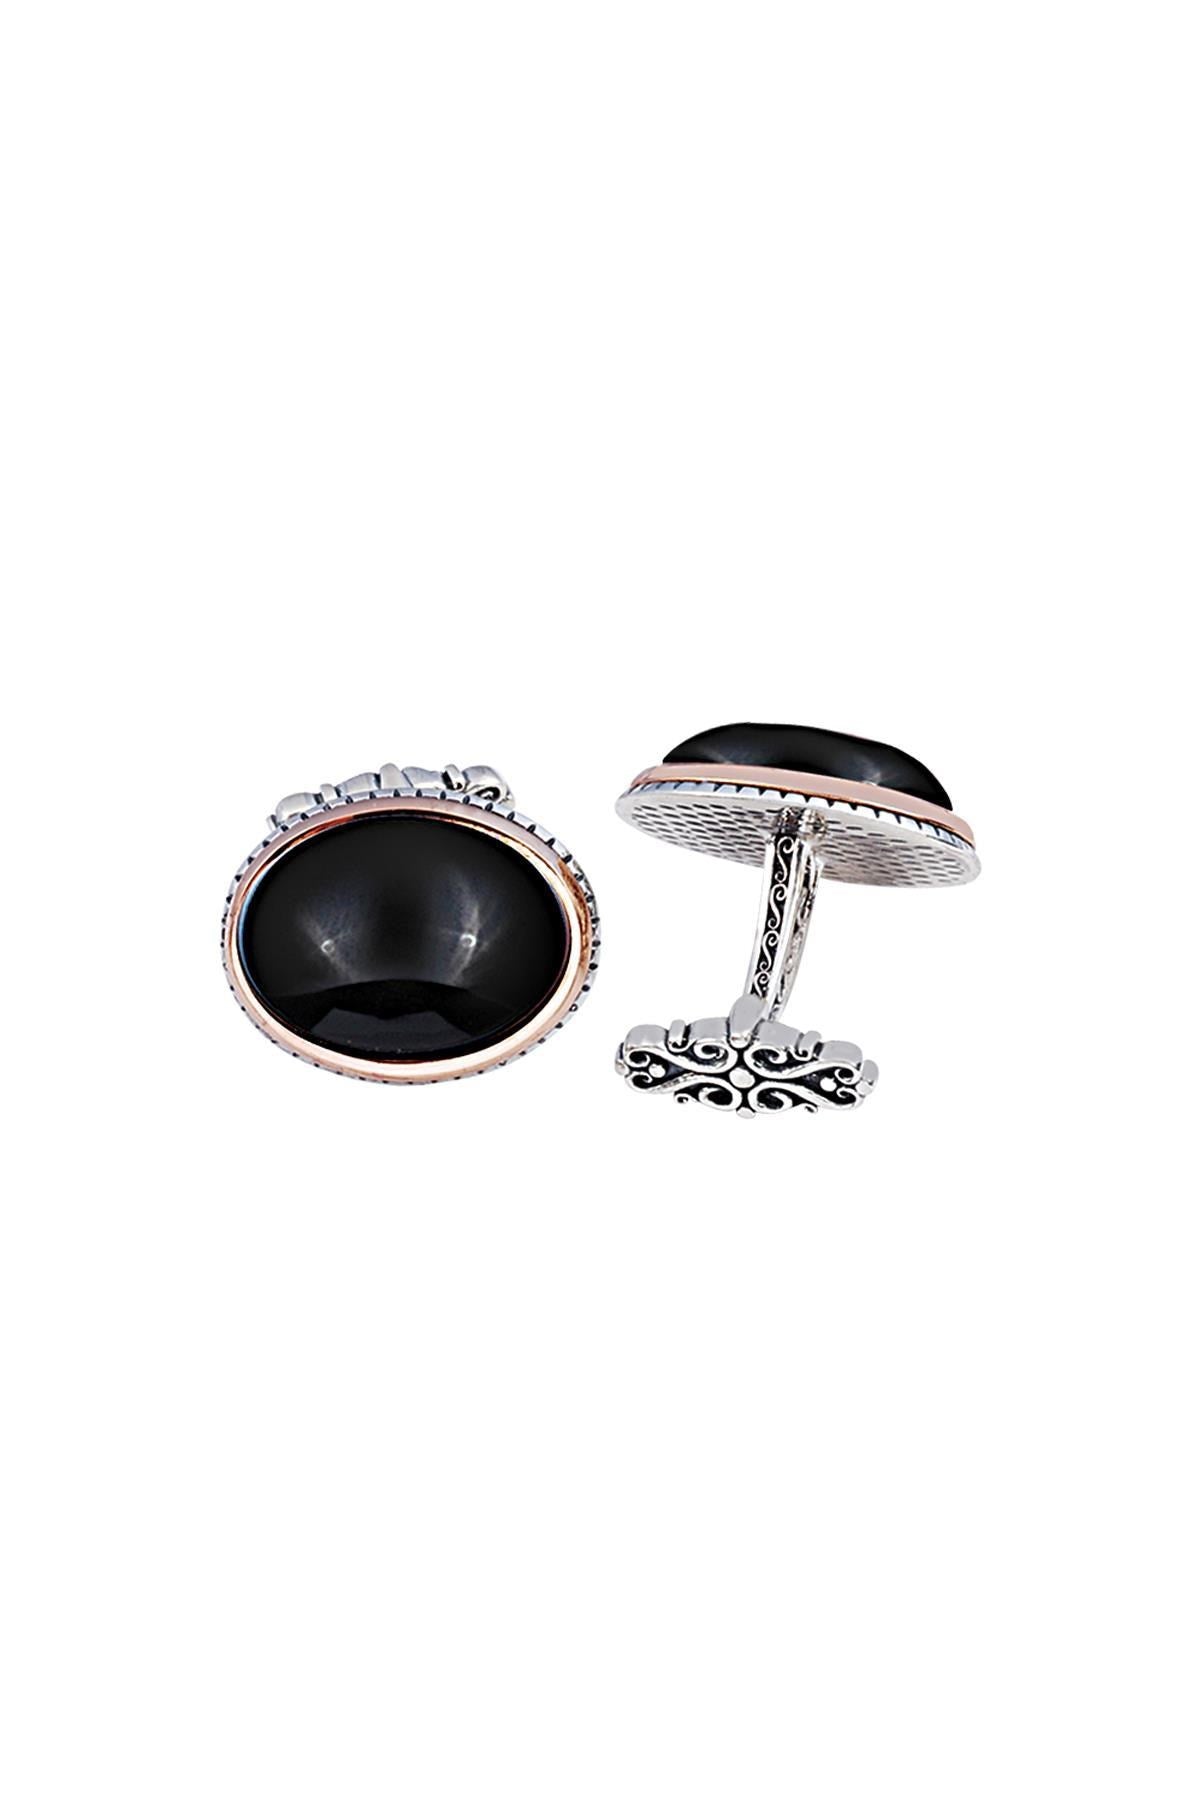 Black Onyx Sterling Silver Oval Cufflinks - Ideal Gift for Groomsmen & Special Occasions